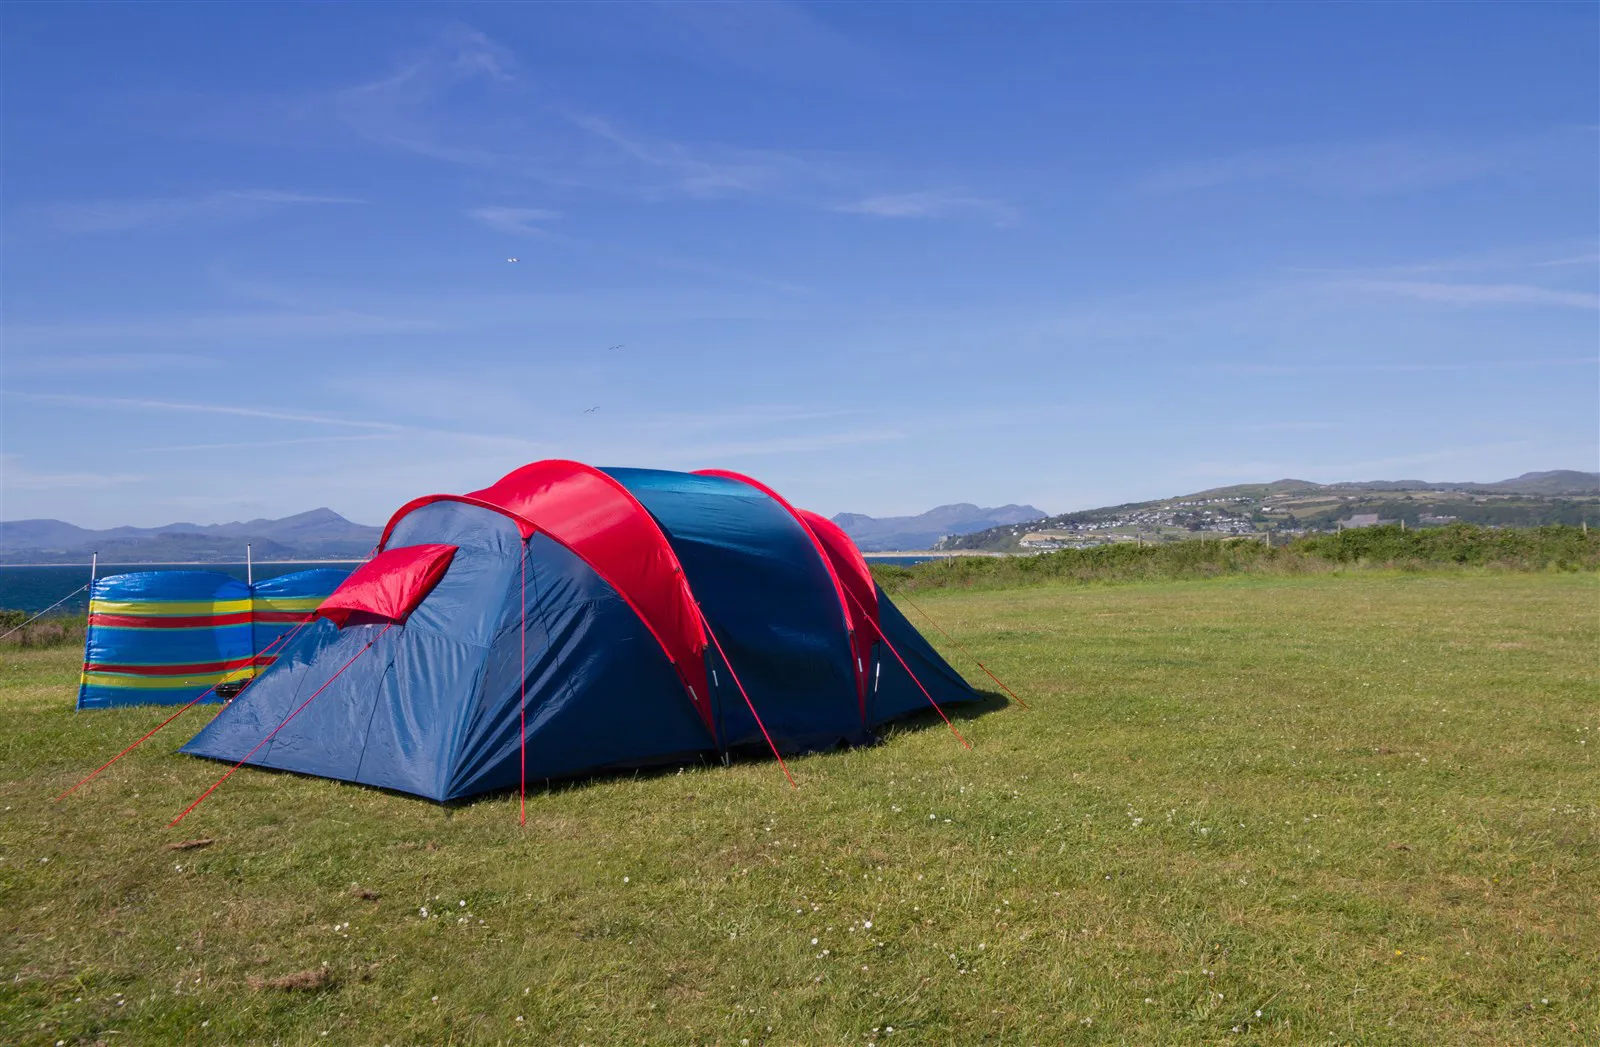 The wild camping code of conduct